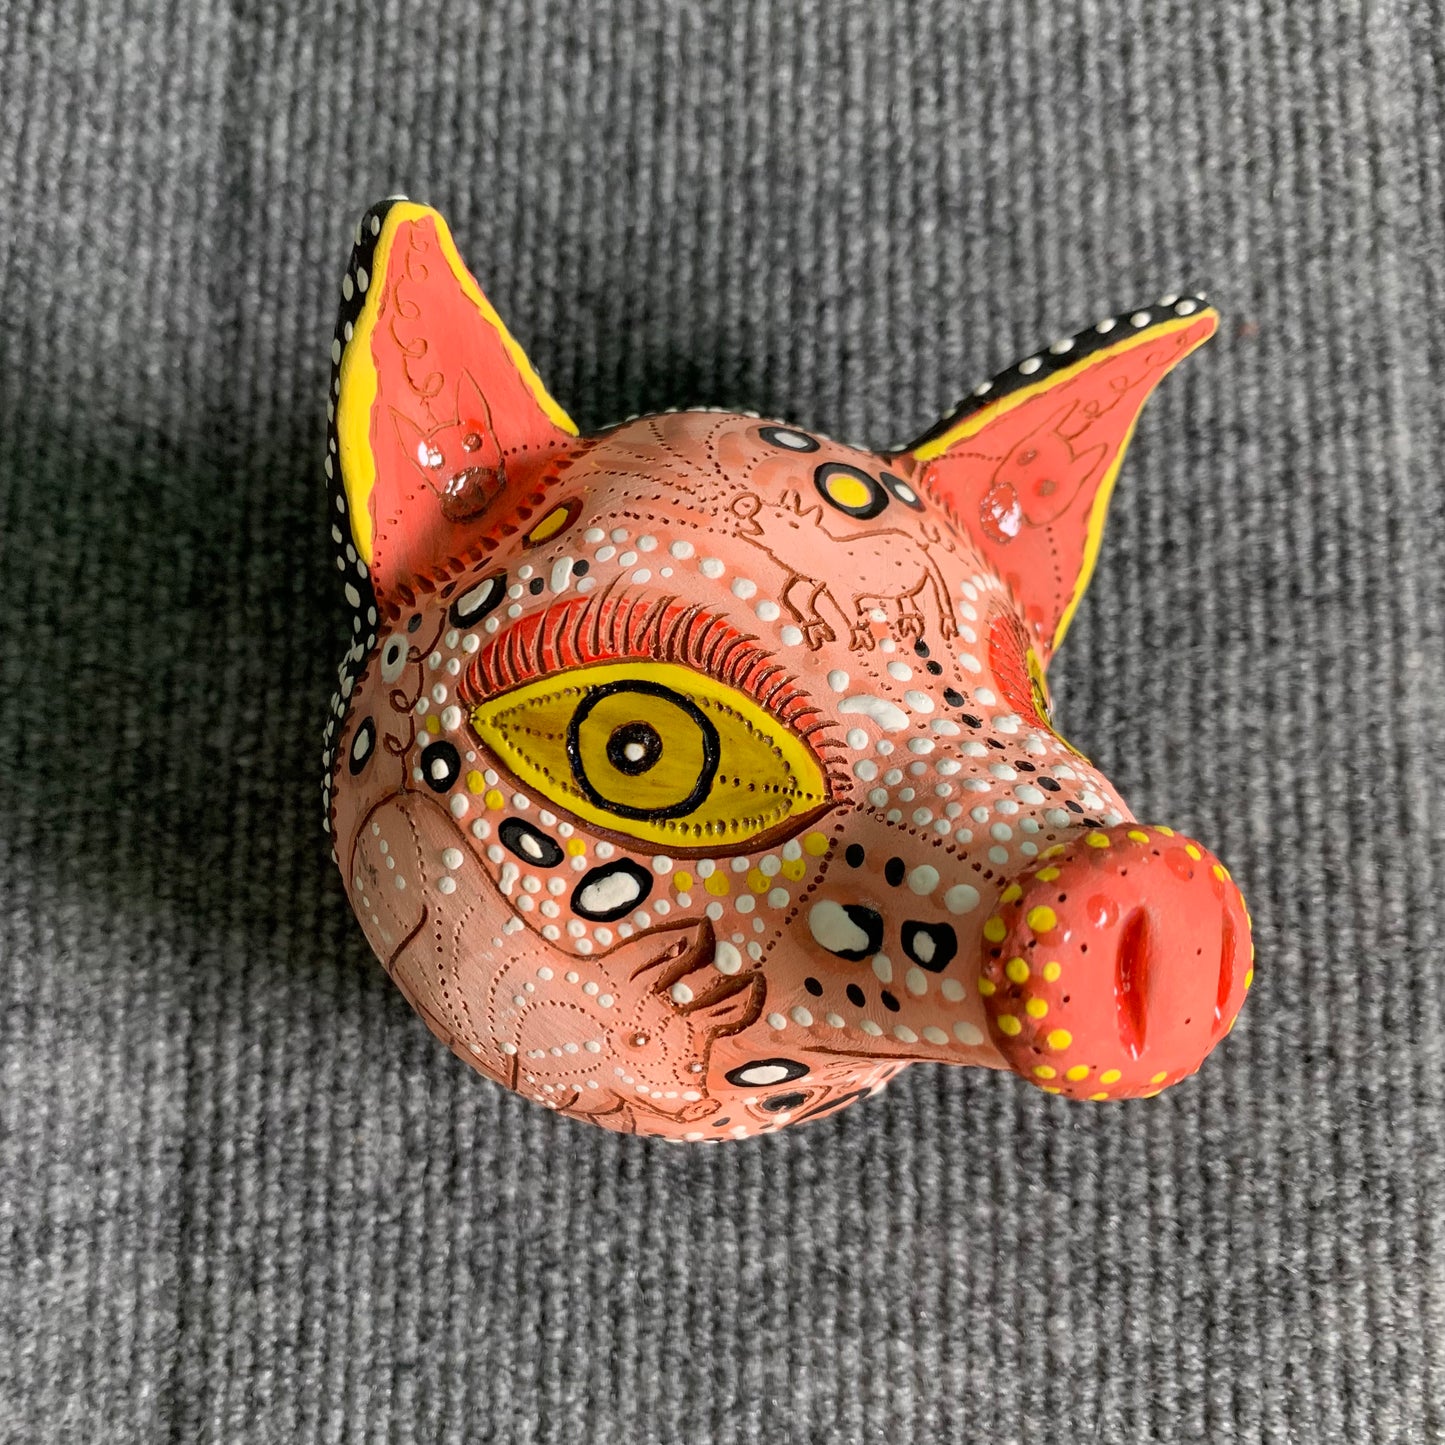 This little piggy wall hanging